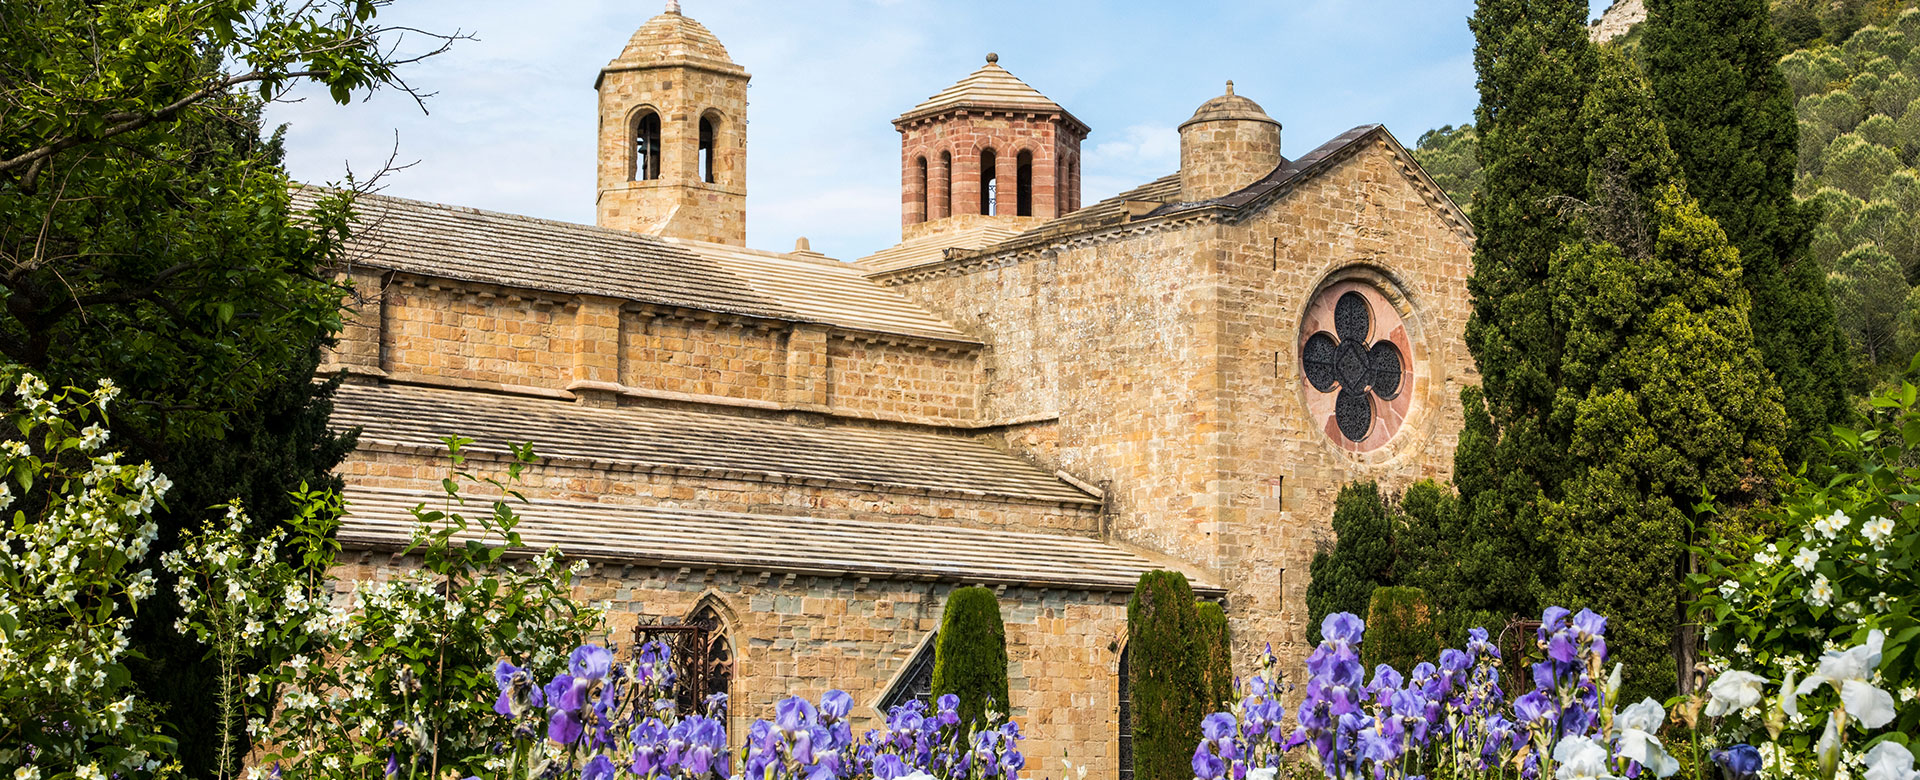 Fontfroide Abbey, well worth a visit during your stay at La Gabinelle campsite in Hérault